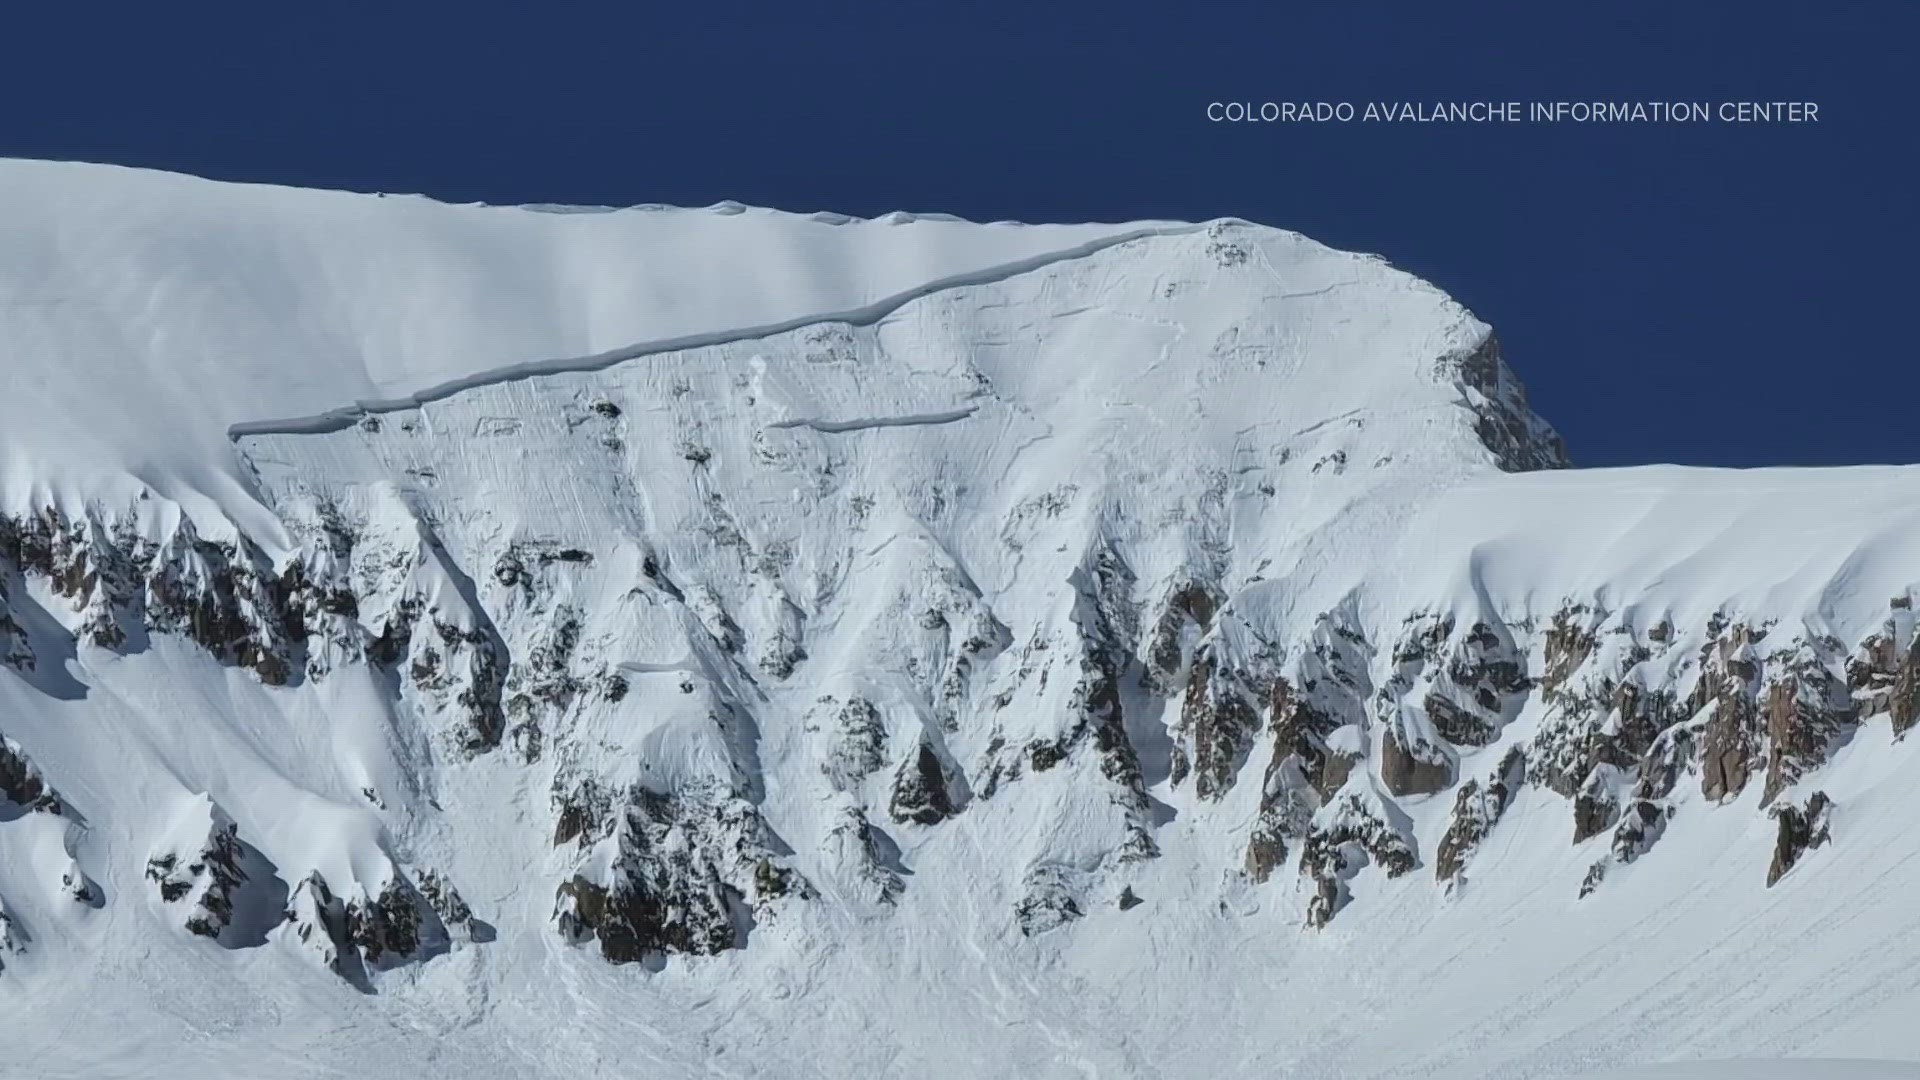 Two other people were also caught in the avalanche Friday.